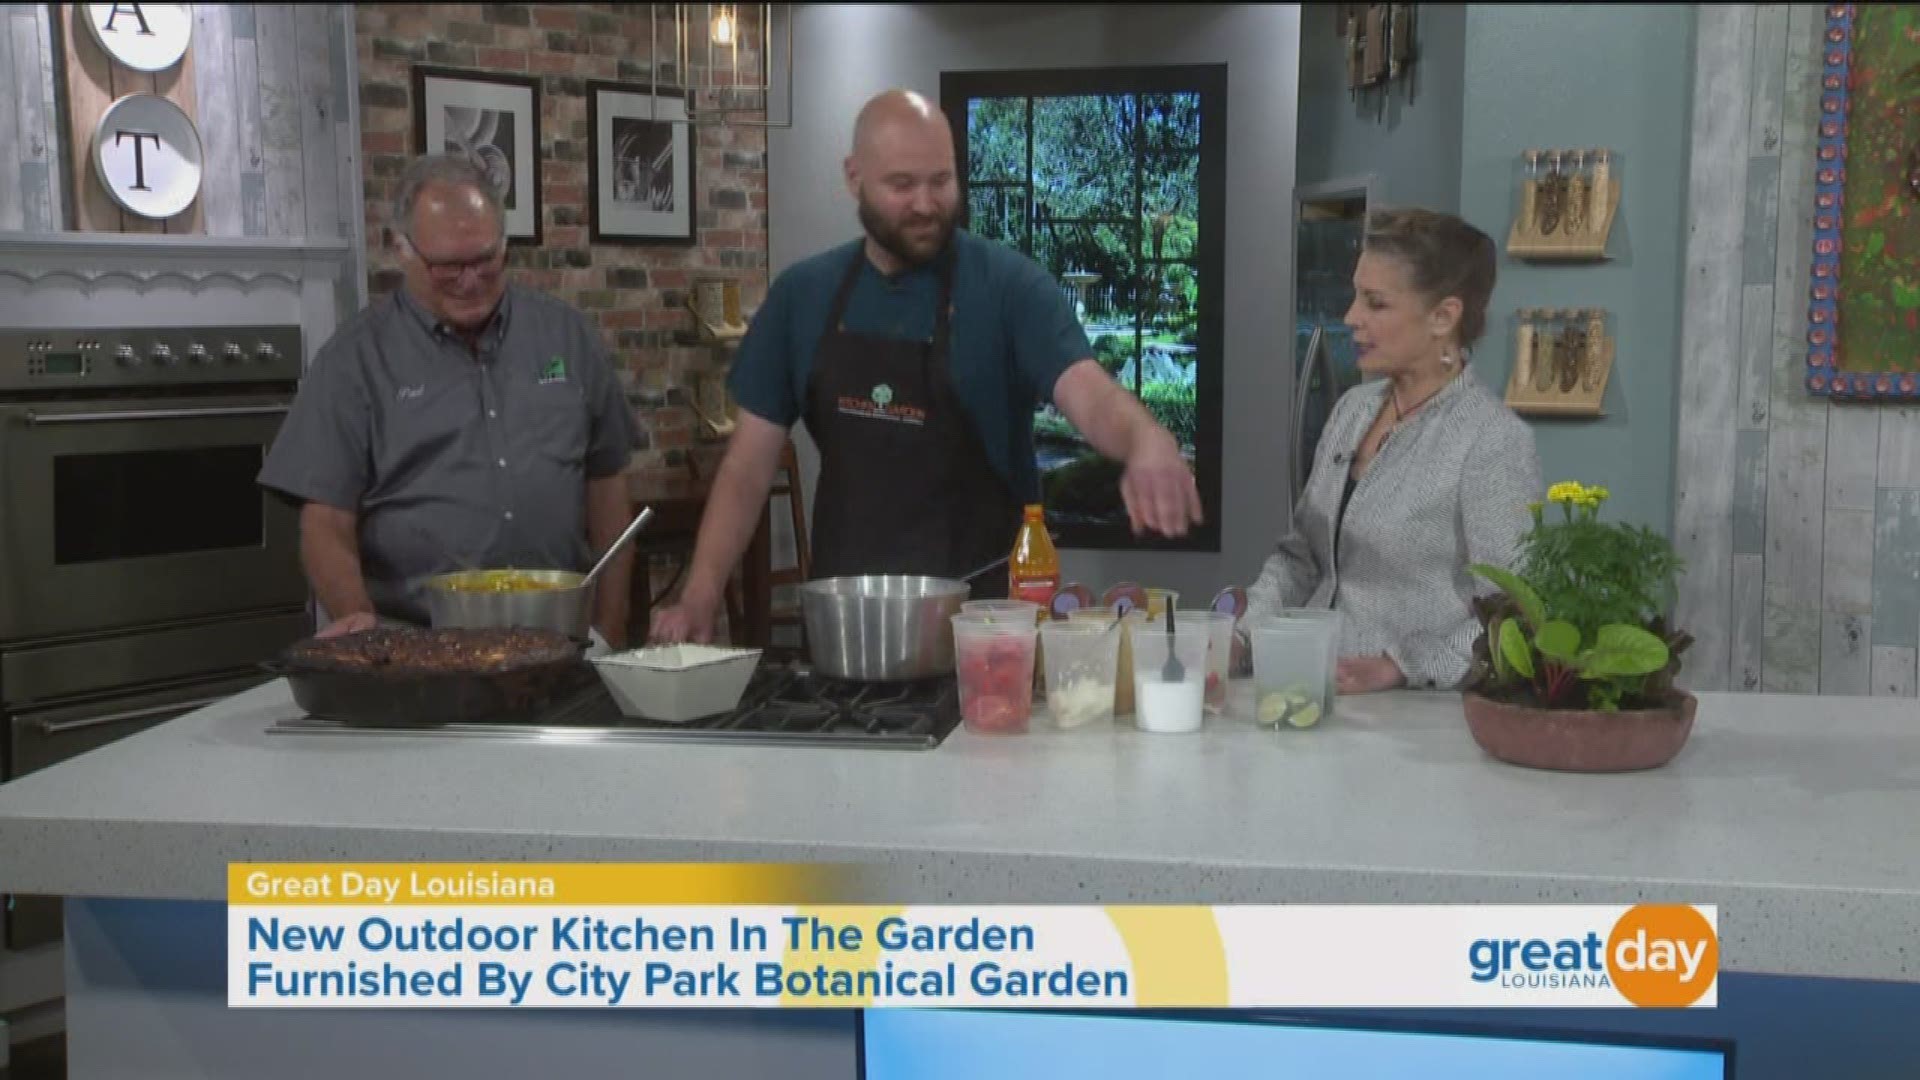 Poppy Tooker learns all about the new outdoor kitchen and events in the Botanical Garden in City Park.